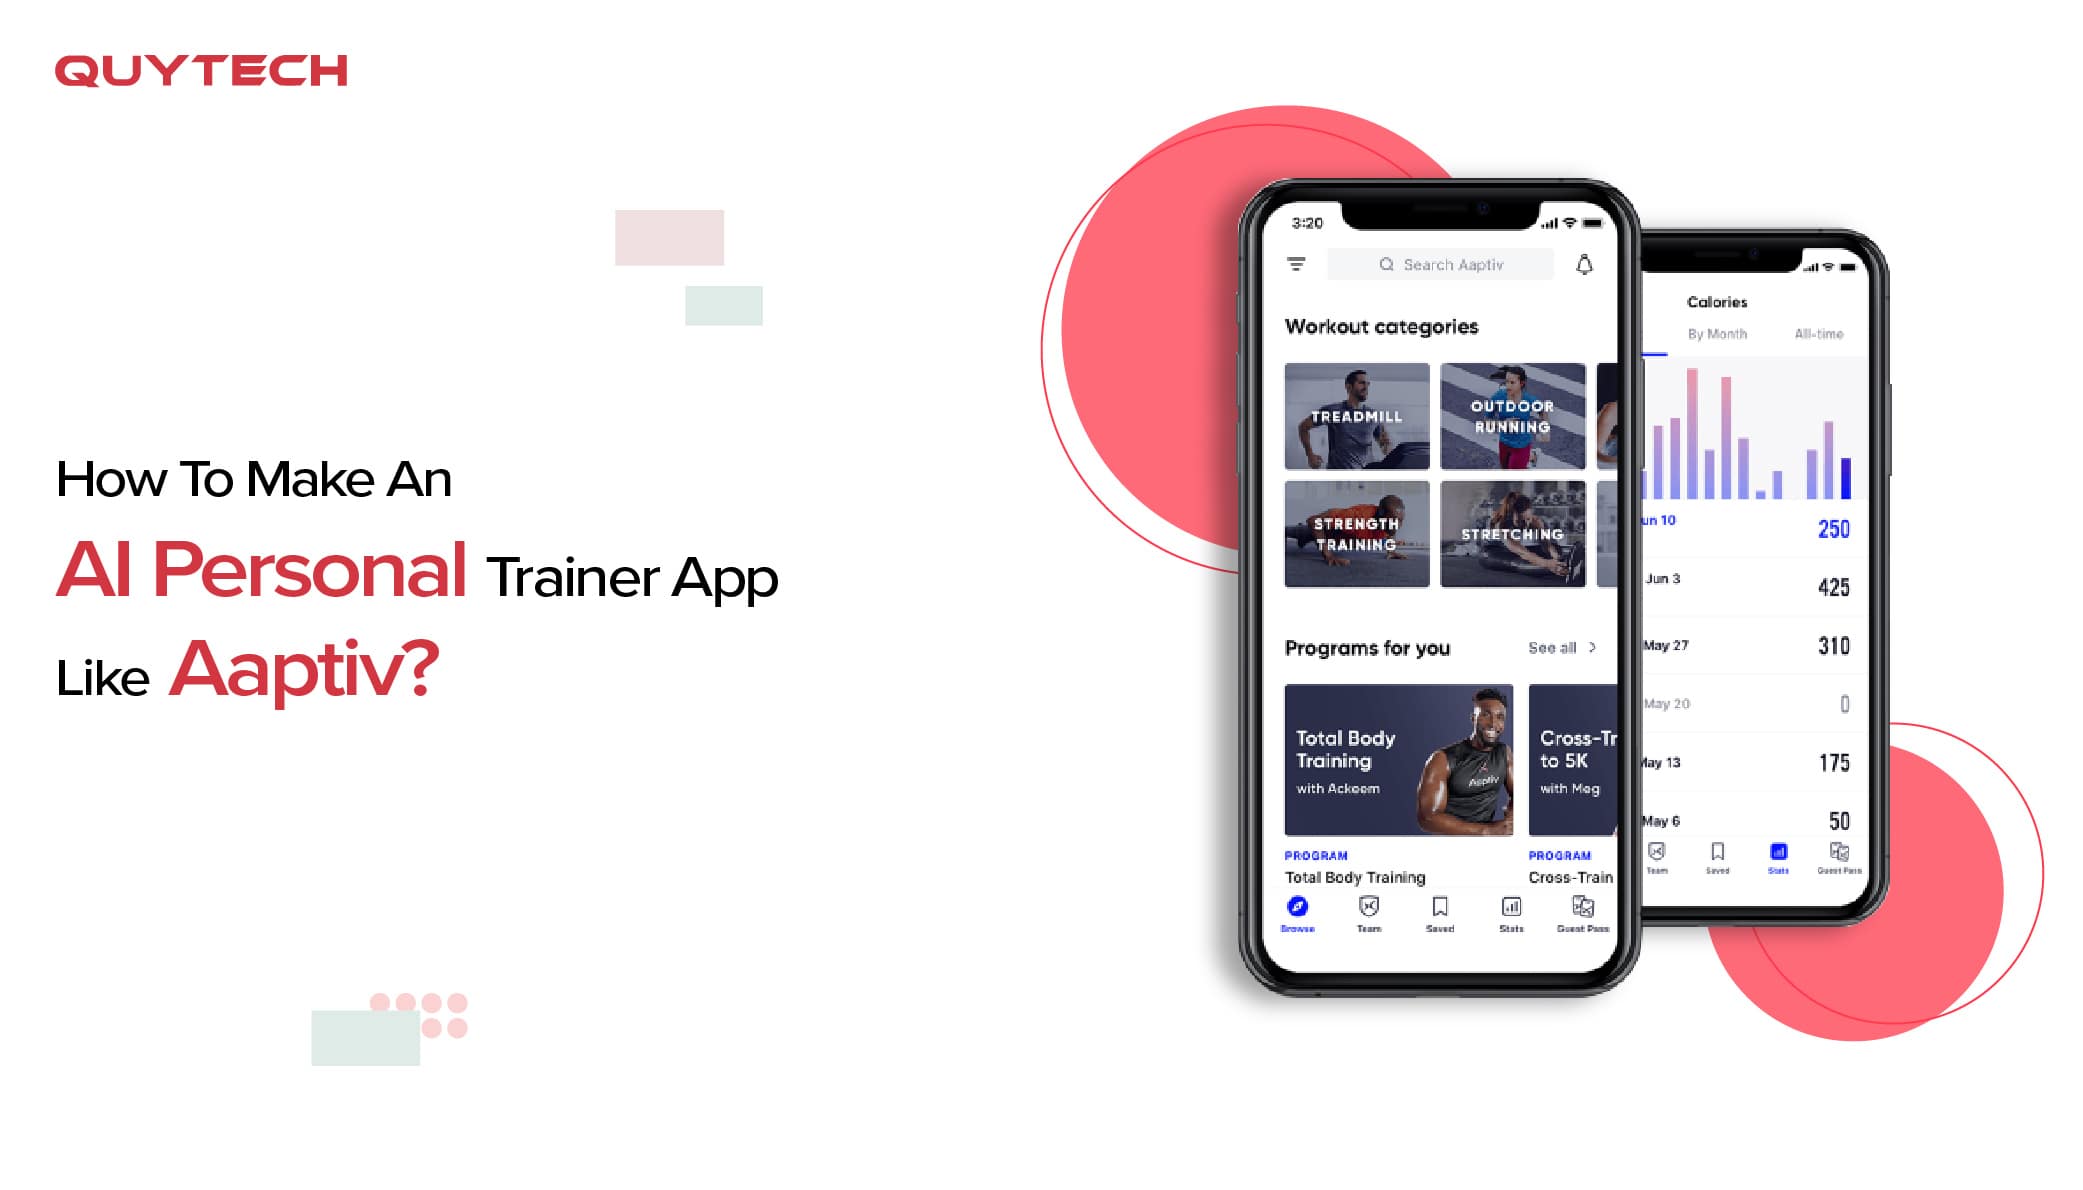 How to make an AI Personal Trainer App like Aaptiv